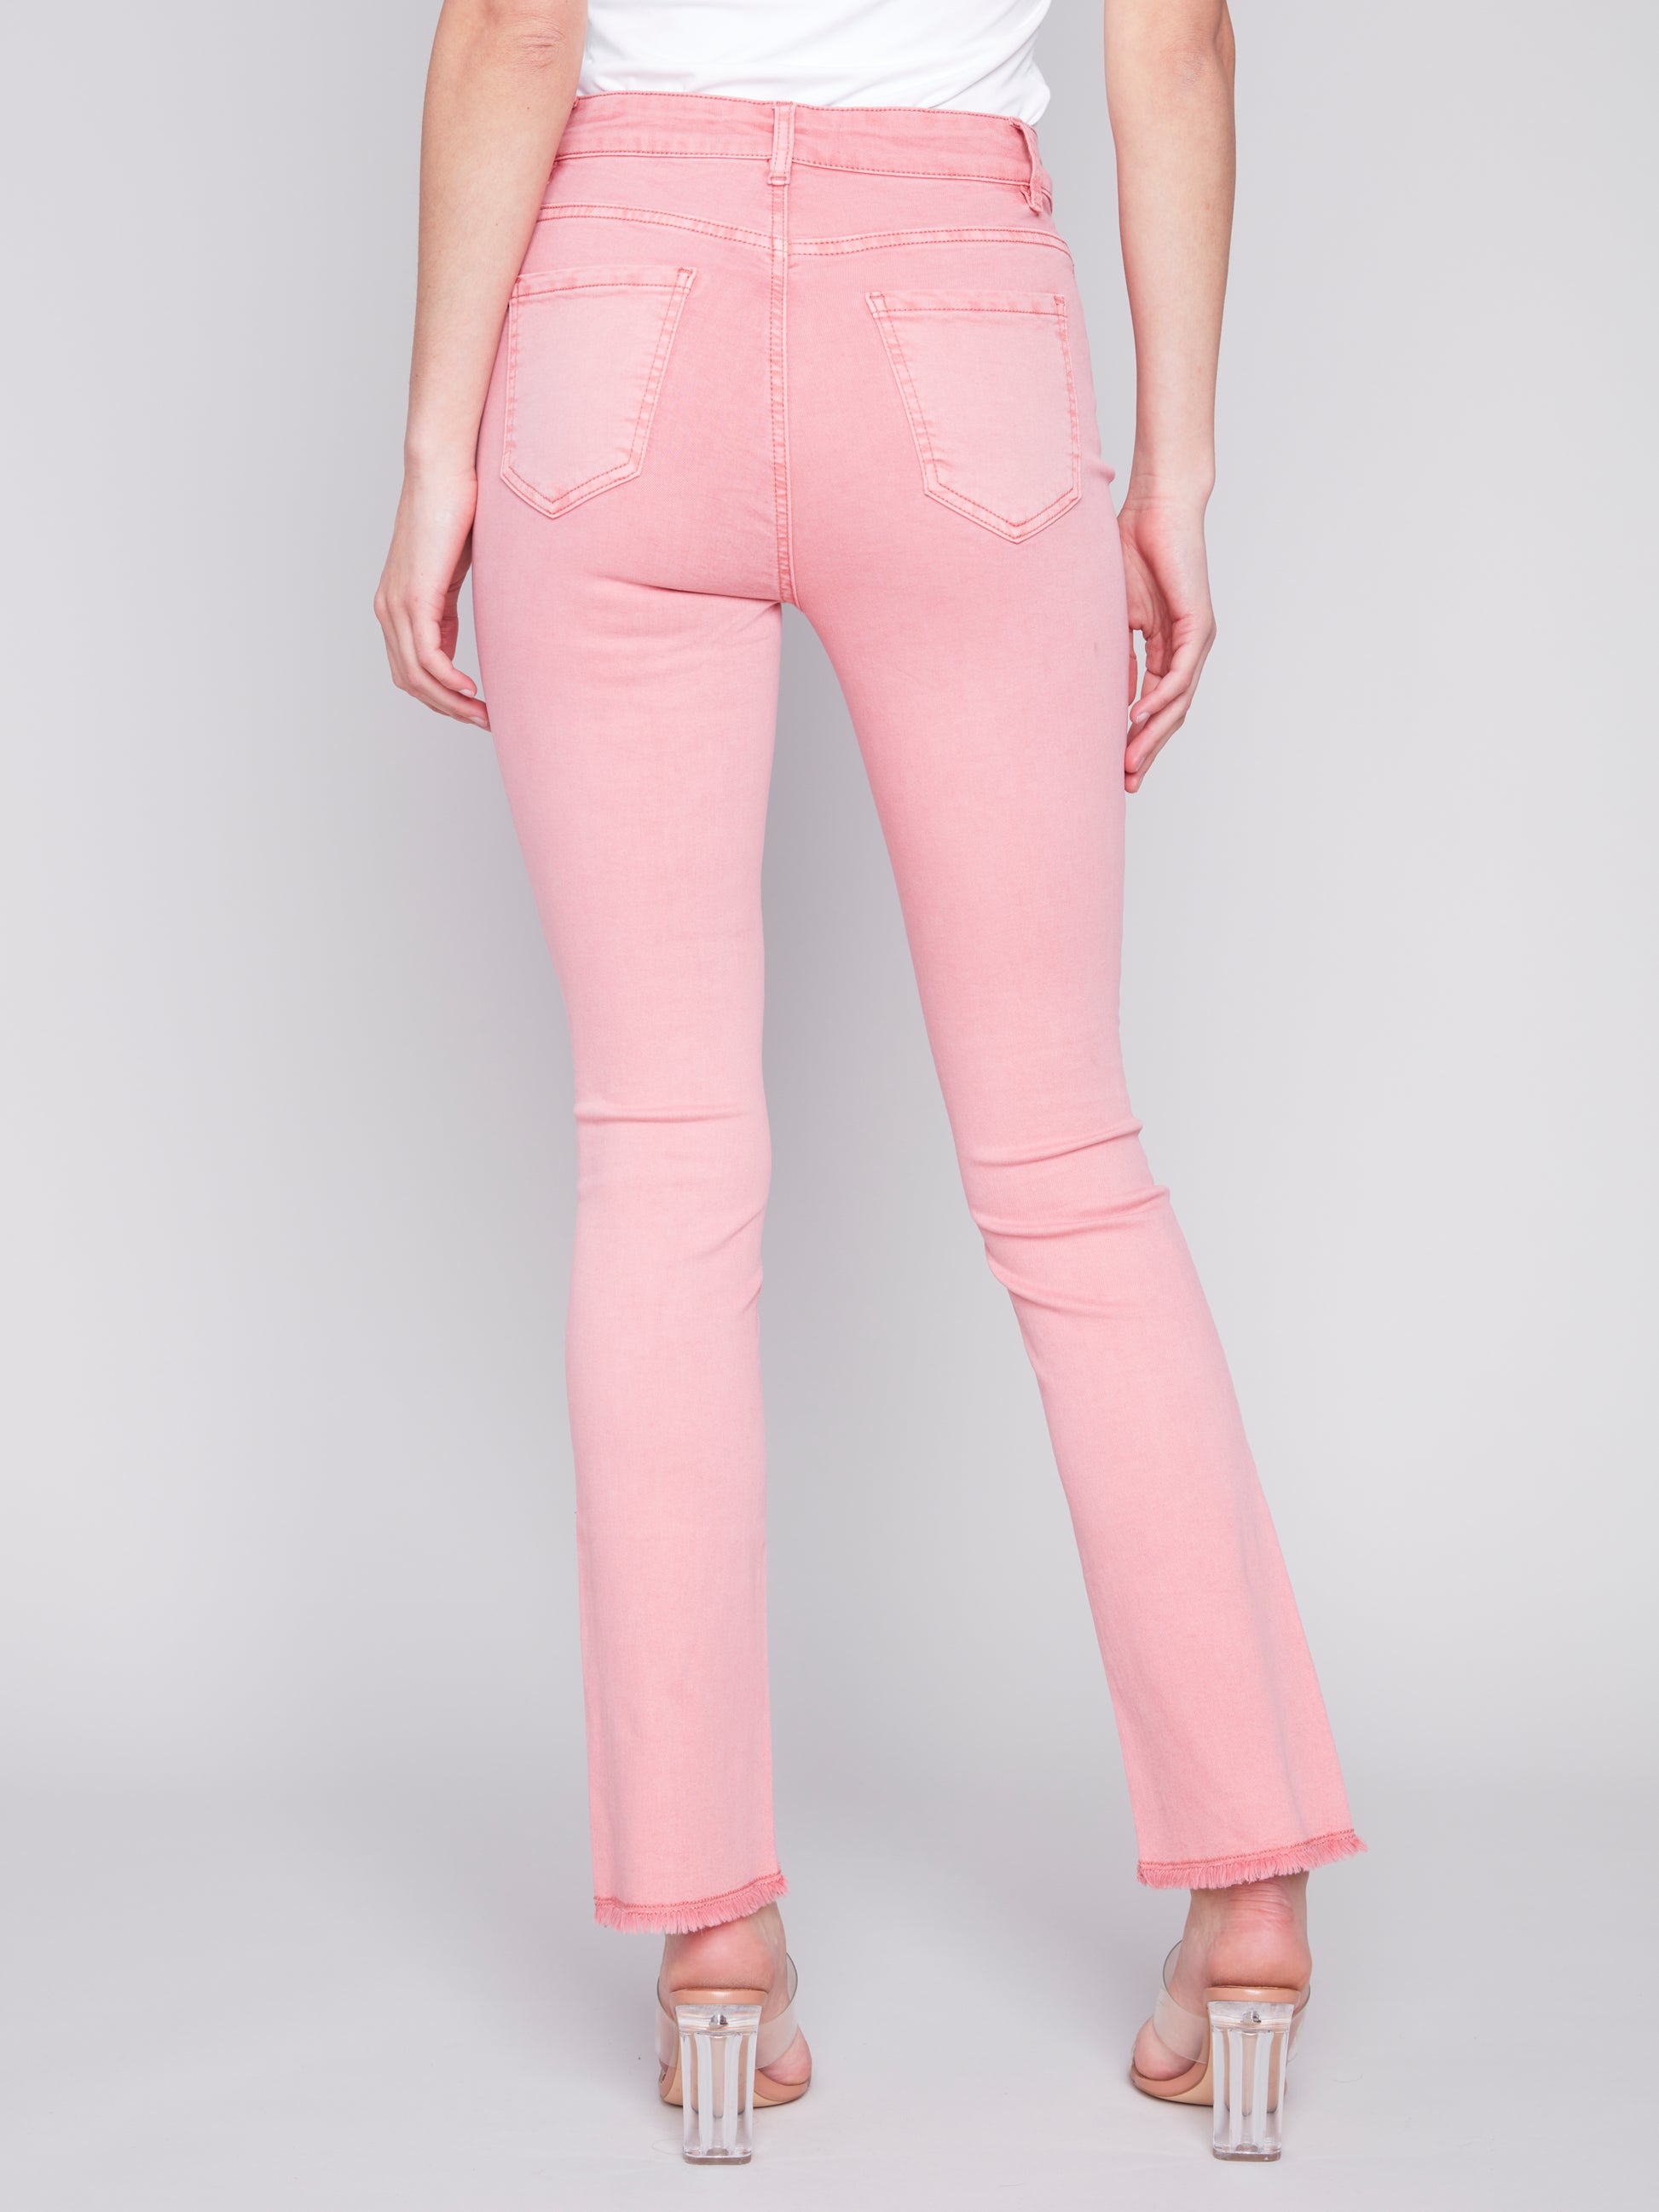 A woman wearing timeless design pink jeans with Charlie B's Asymmetrical Frayed Hem Bell Bottoms and a white top.